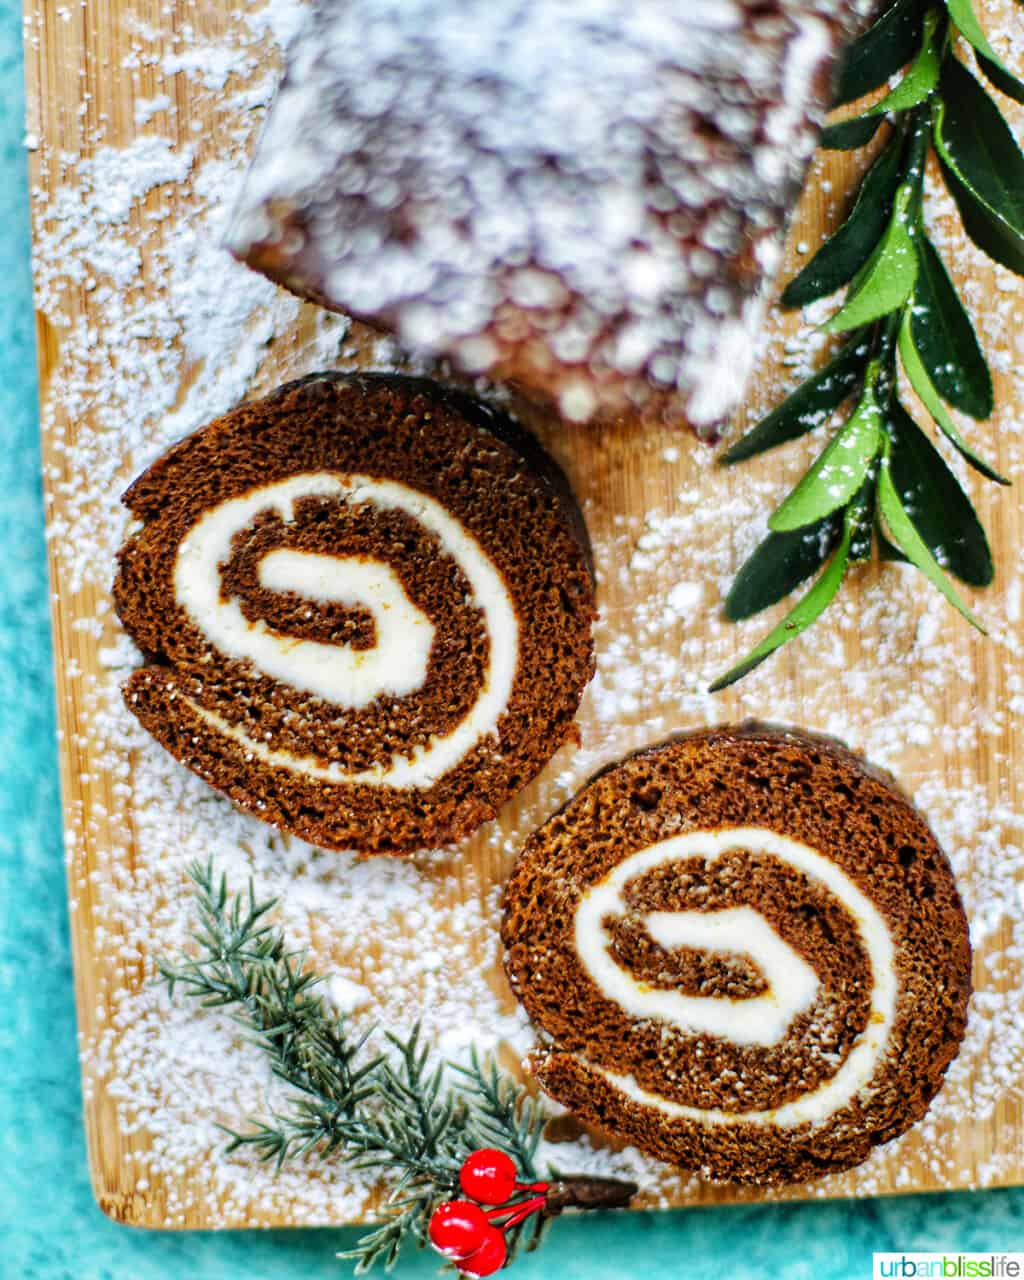 two big slices of Gingerbread cake roll